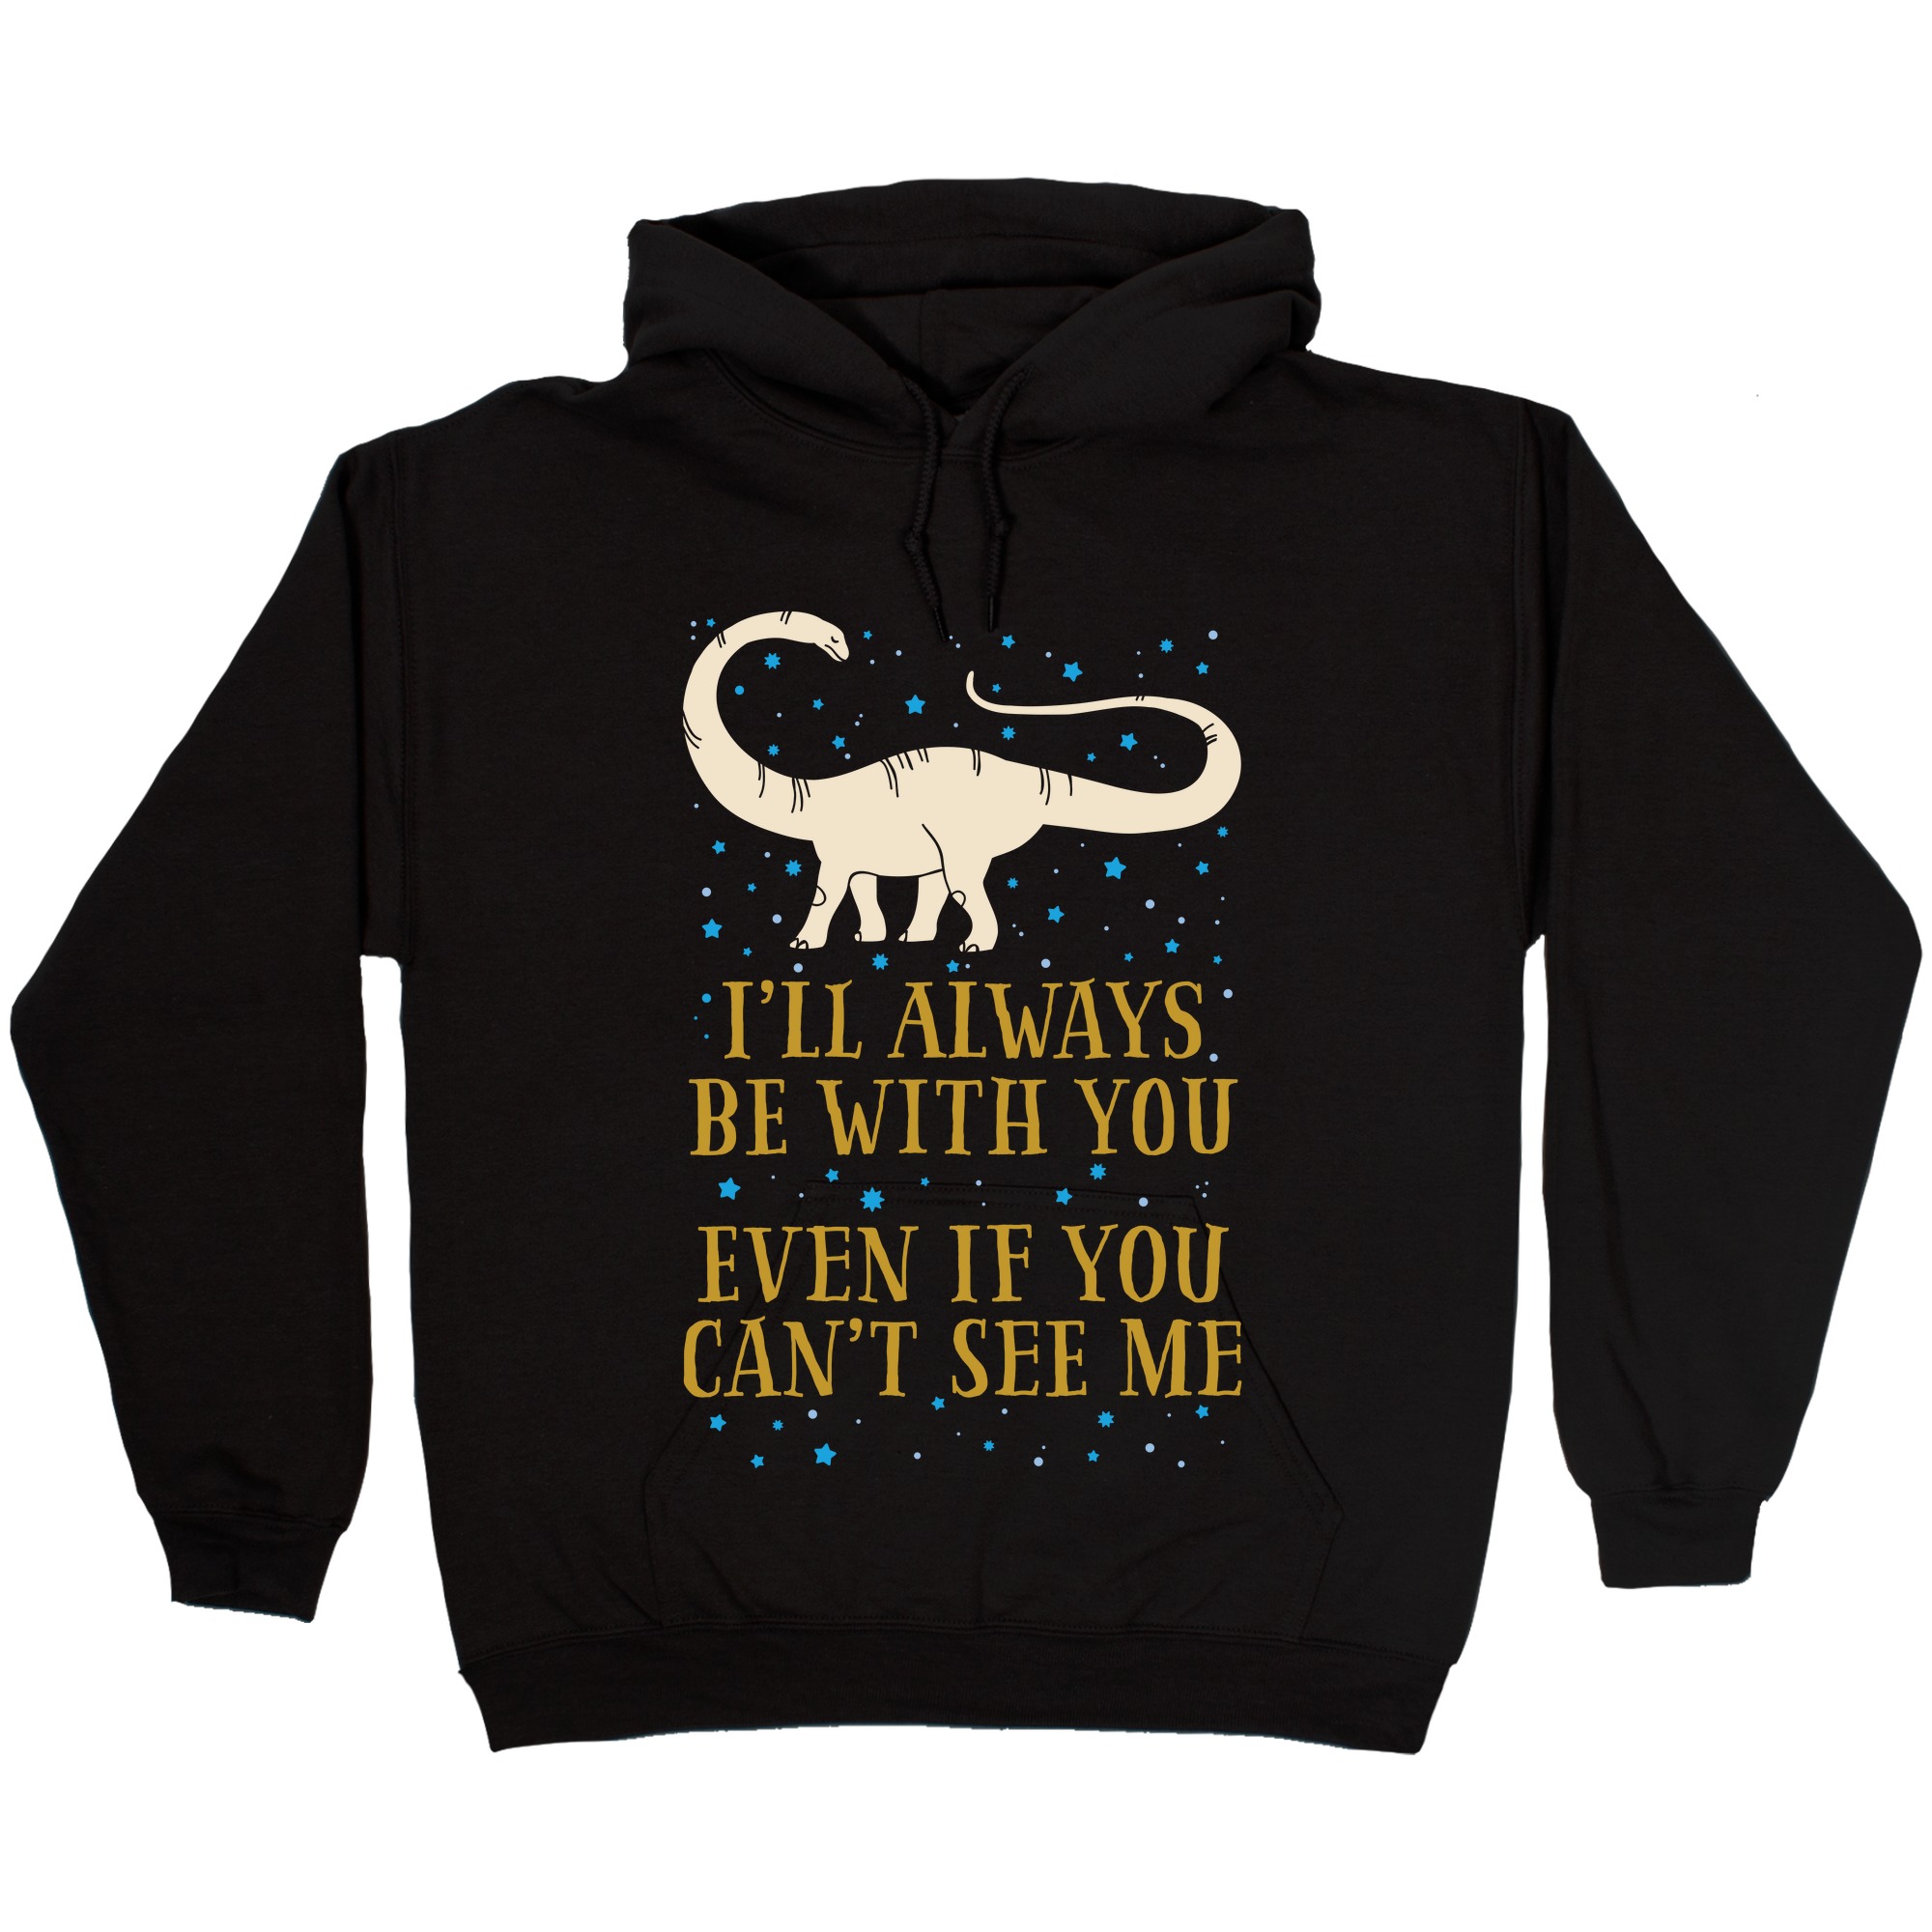 I Ll Always Be With You Even If You Can T See Me Hooded Sweatshirts Lookhuman